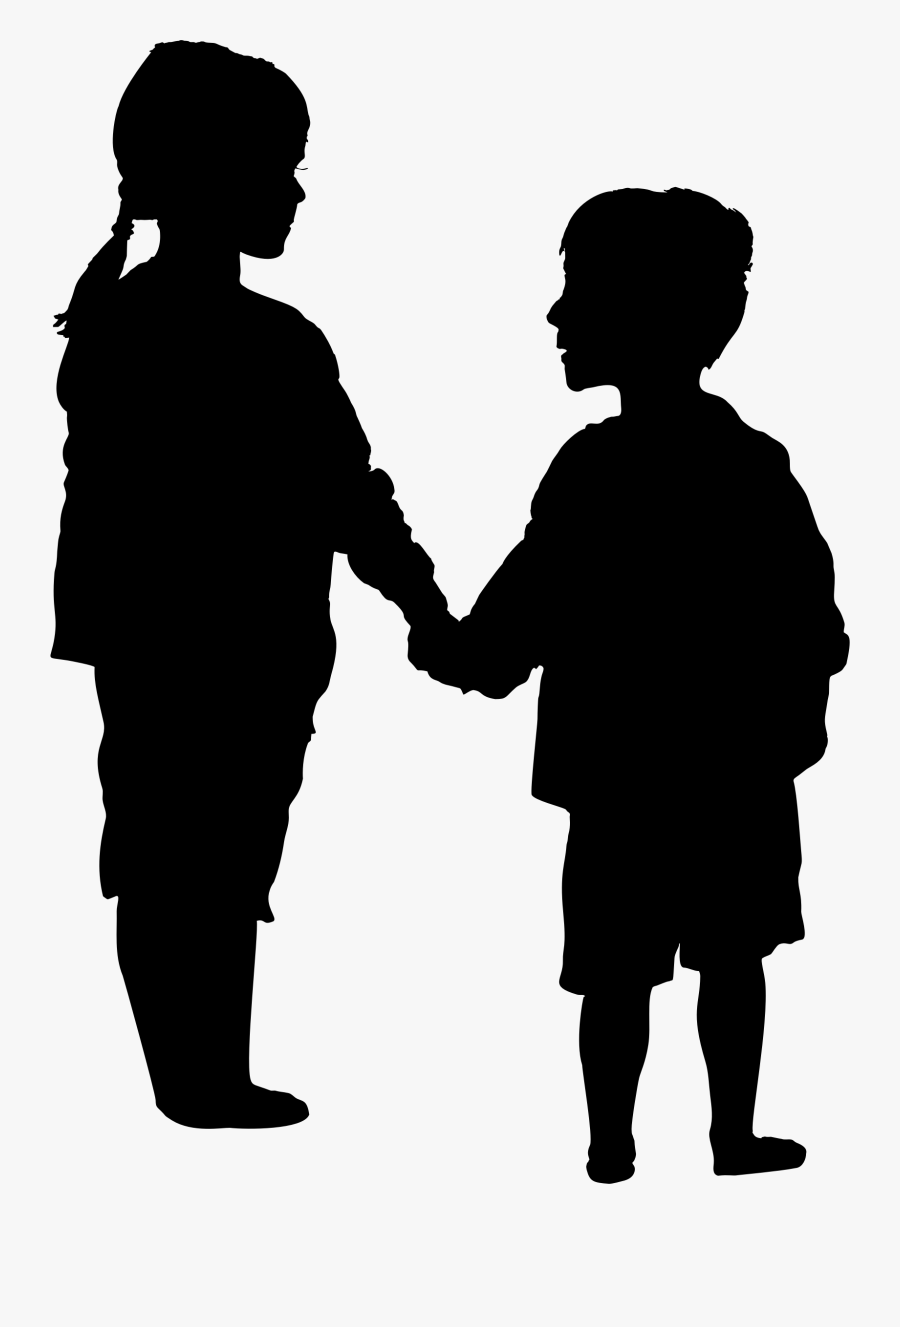 Couple Holding Hands Silhouette Png, Transparent Clipart